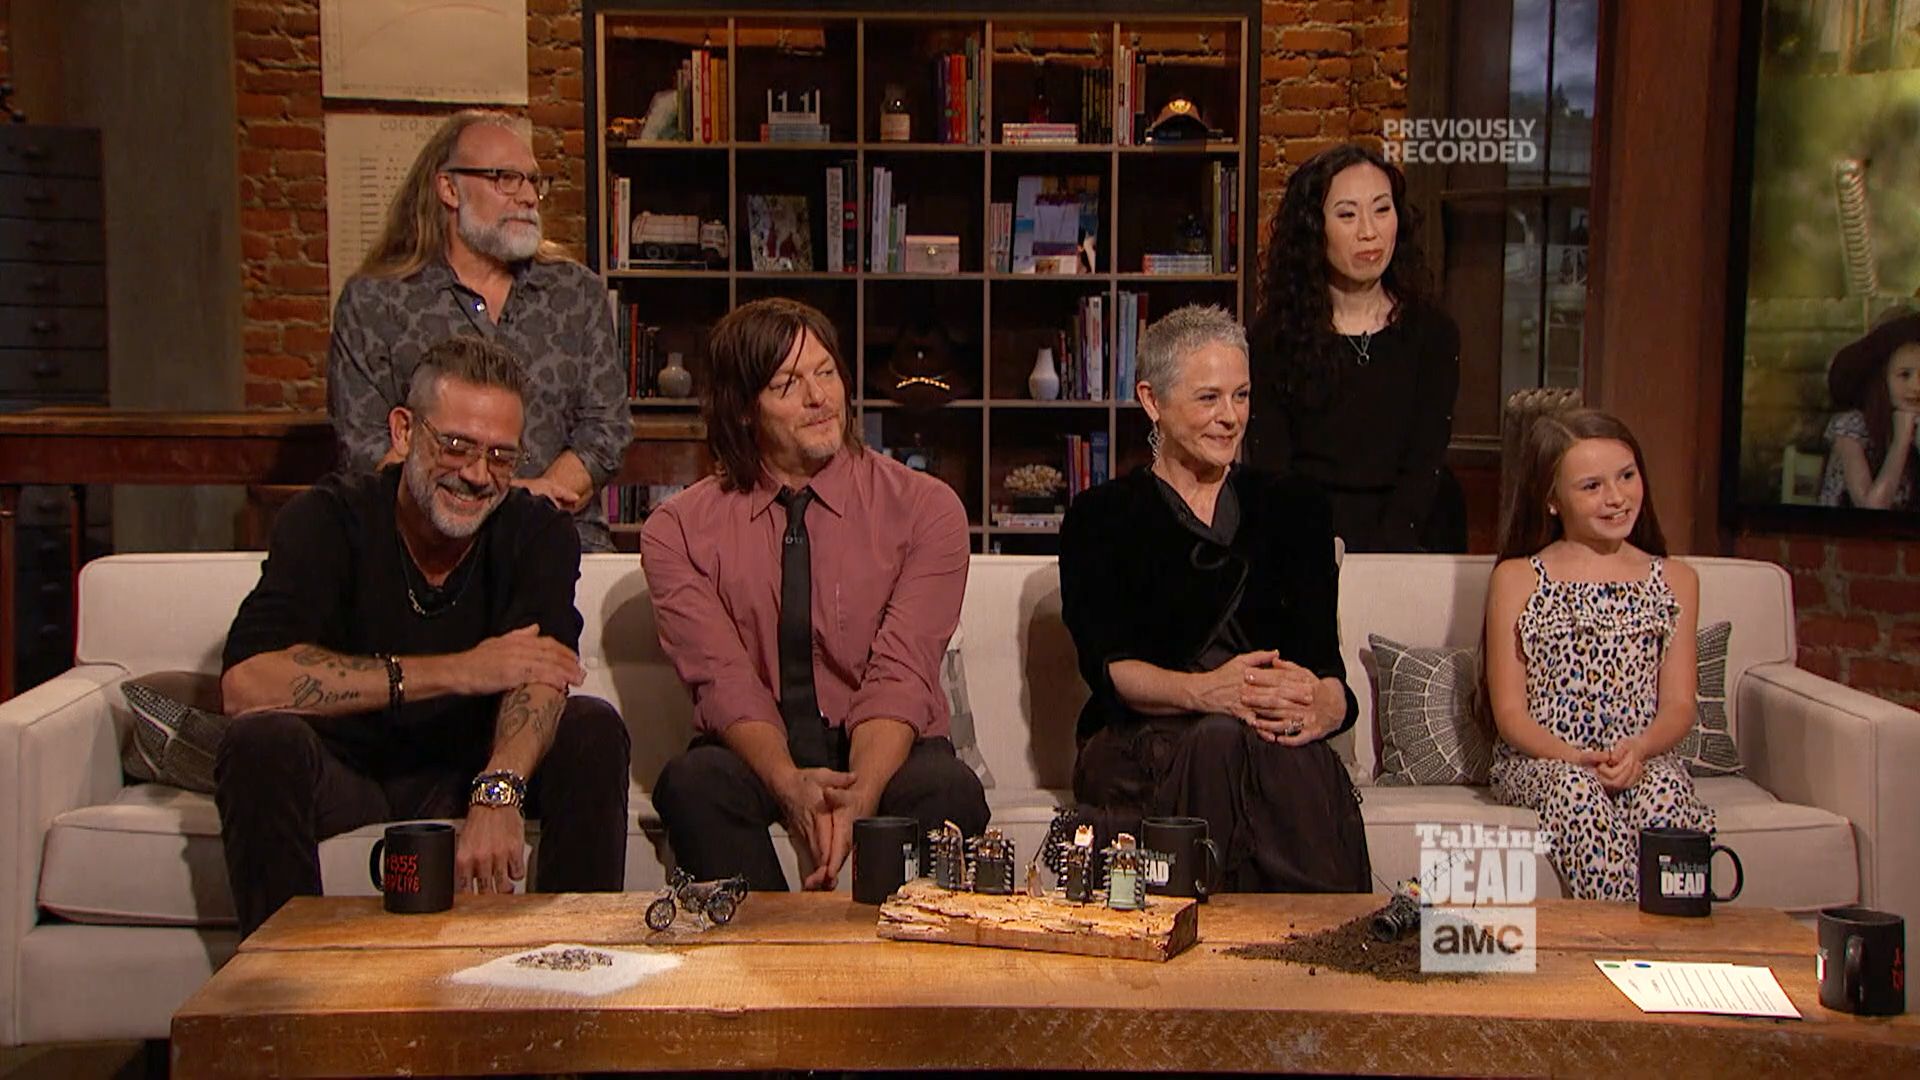 Talking Dead Show Summary, Episodes and TV Guide from onmy.tv